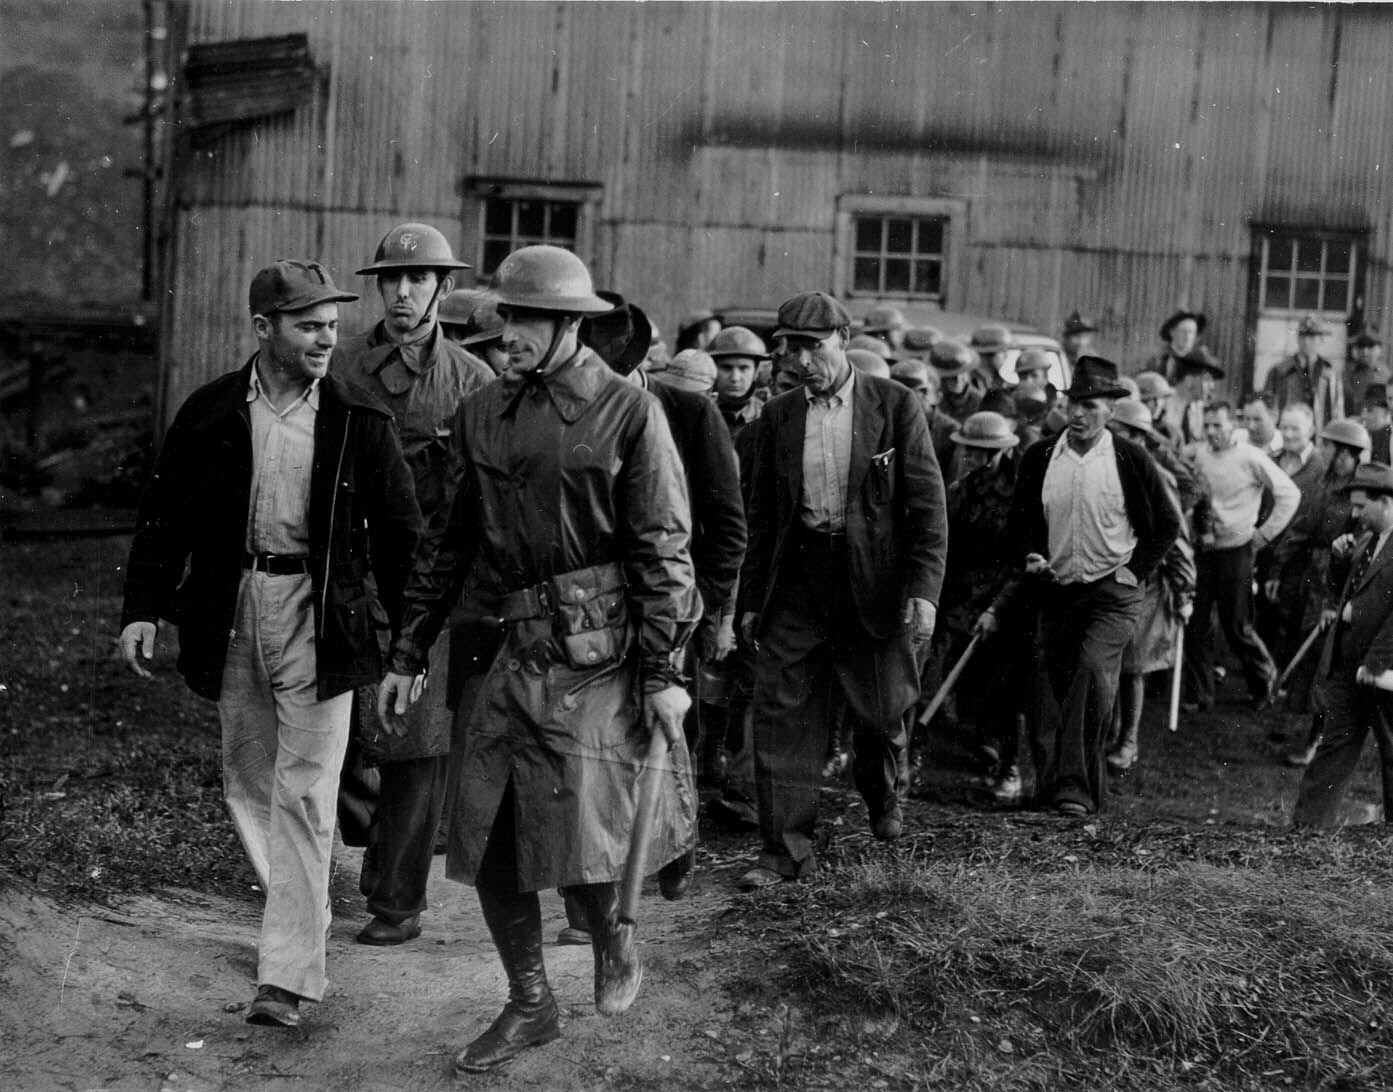  Striking miners in Harlan County KY, 1931 